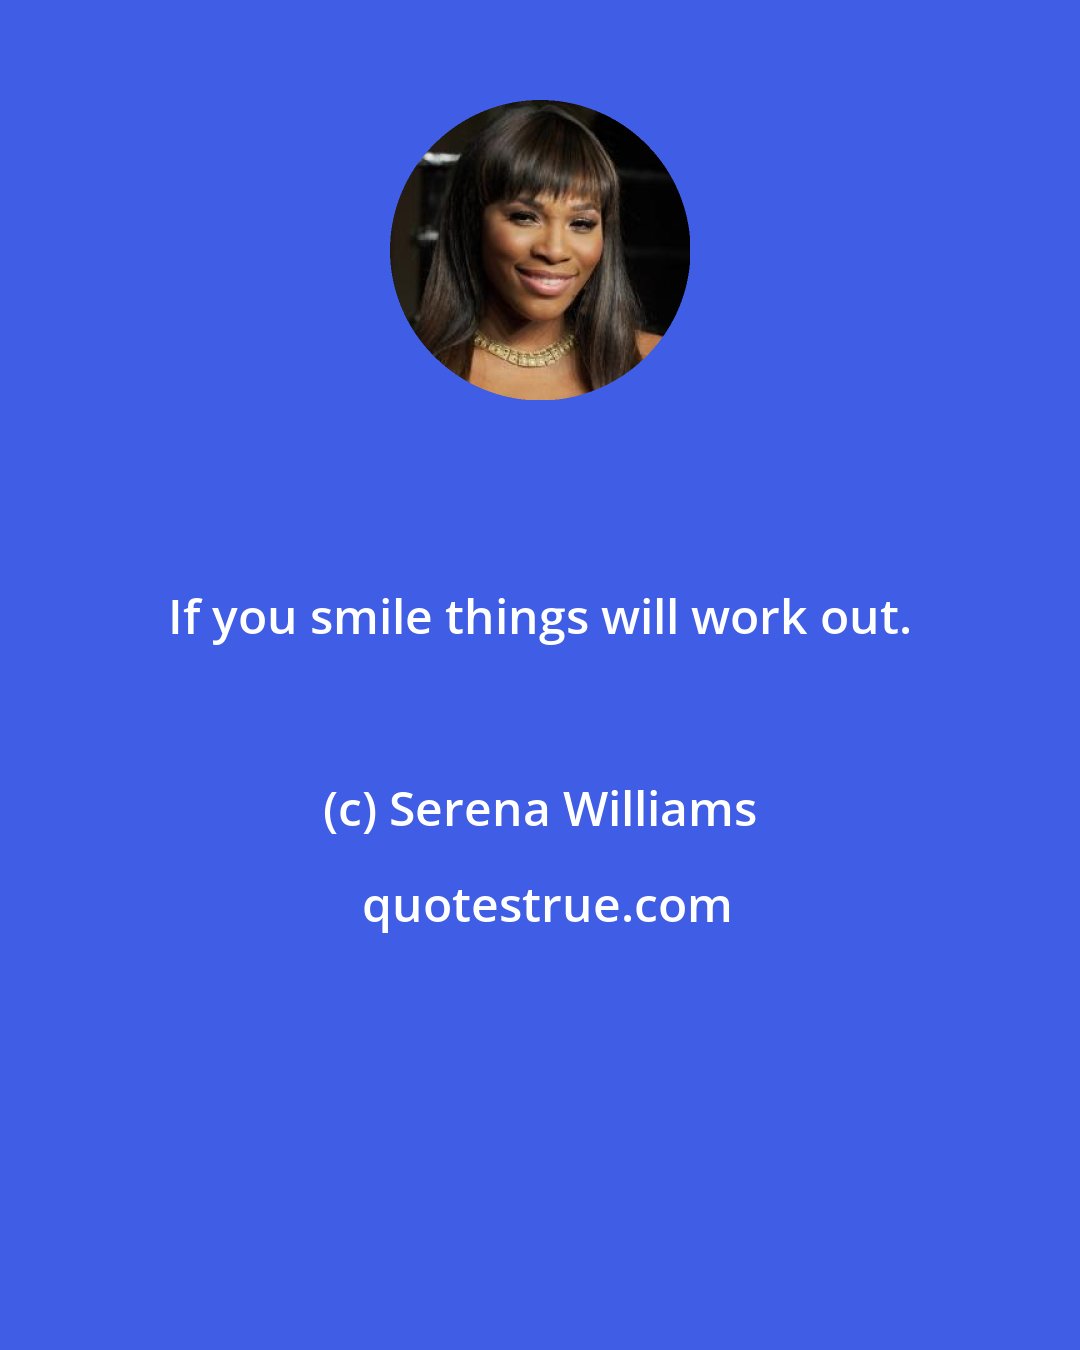 Serena Williams: If you smile things will work out.